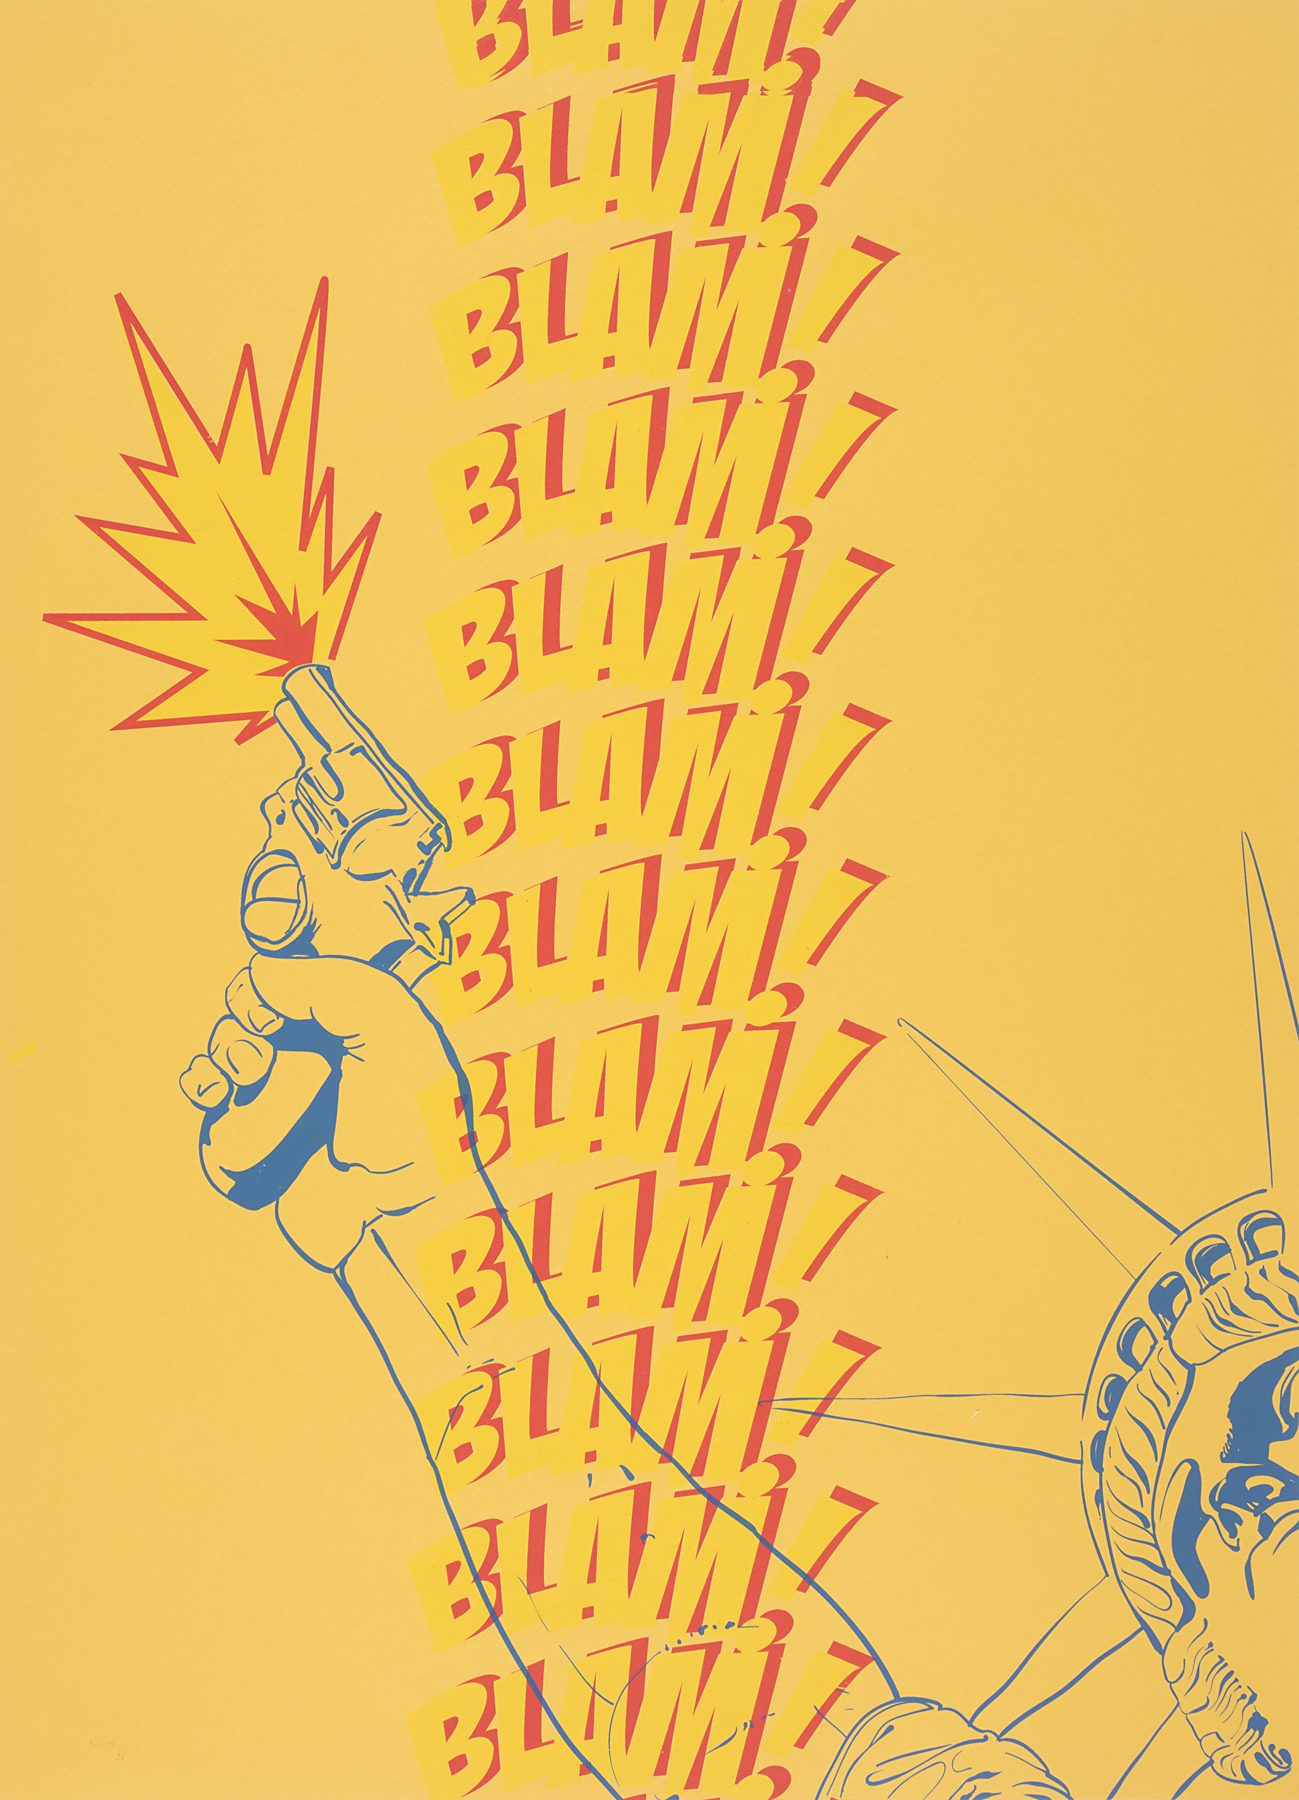 The Statue of Liberty is viewed from below, with only her upraised arm and half of her face visible. Instead of a torch, Lady Liberty is instead holding a handgun and is firing it into the air. A descending column of the word “Blam!” is written in block letters and divides the page in half vertically.